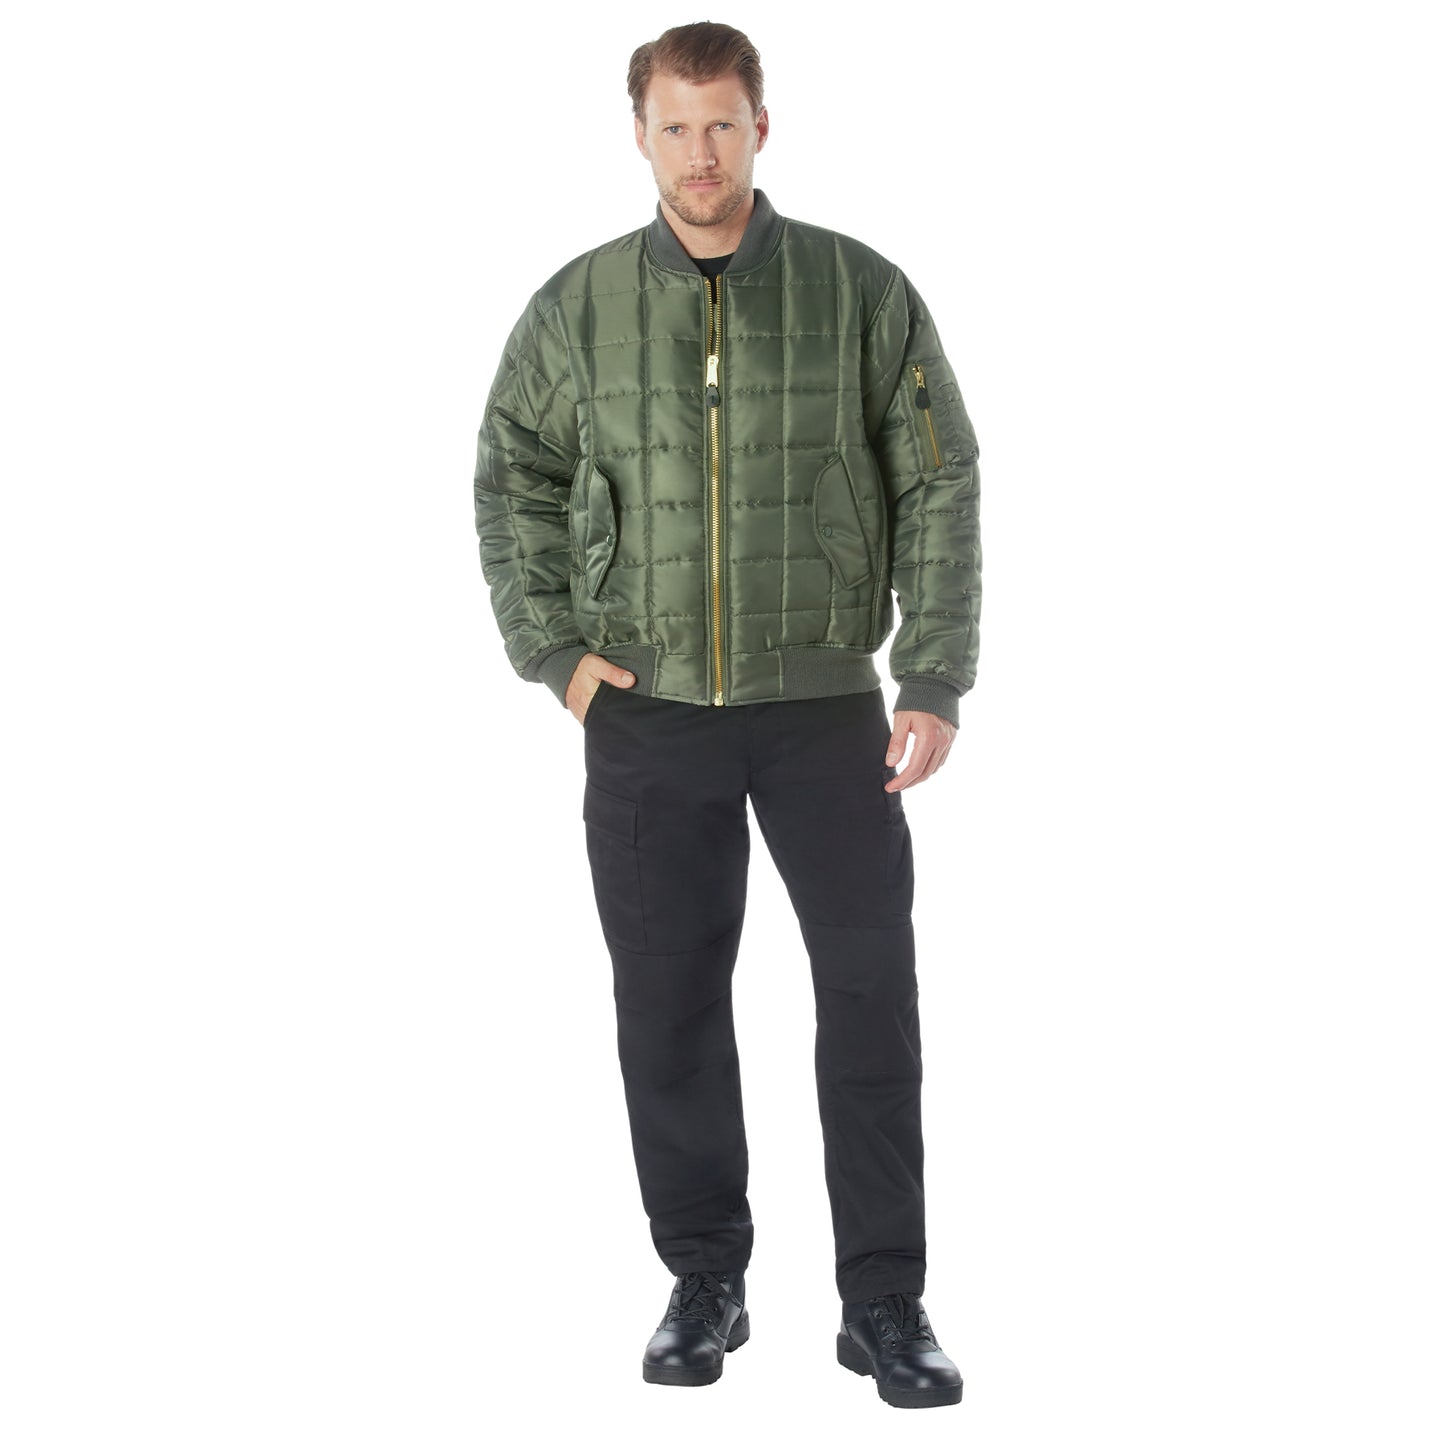 Rothco Quilted MA-1 Flight Jacket